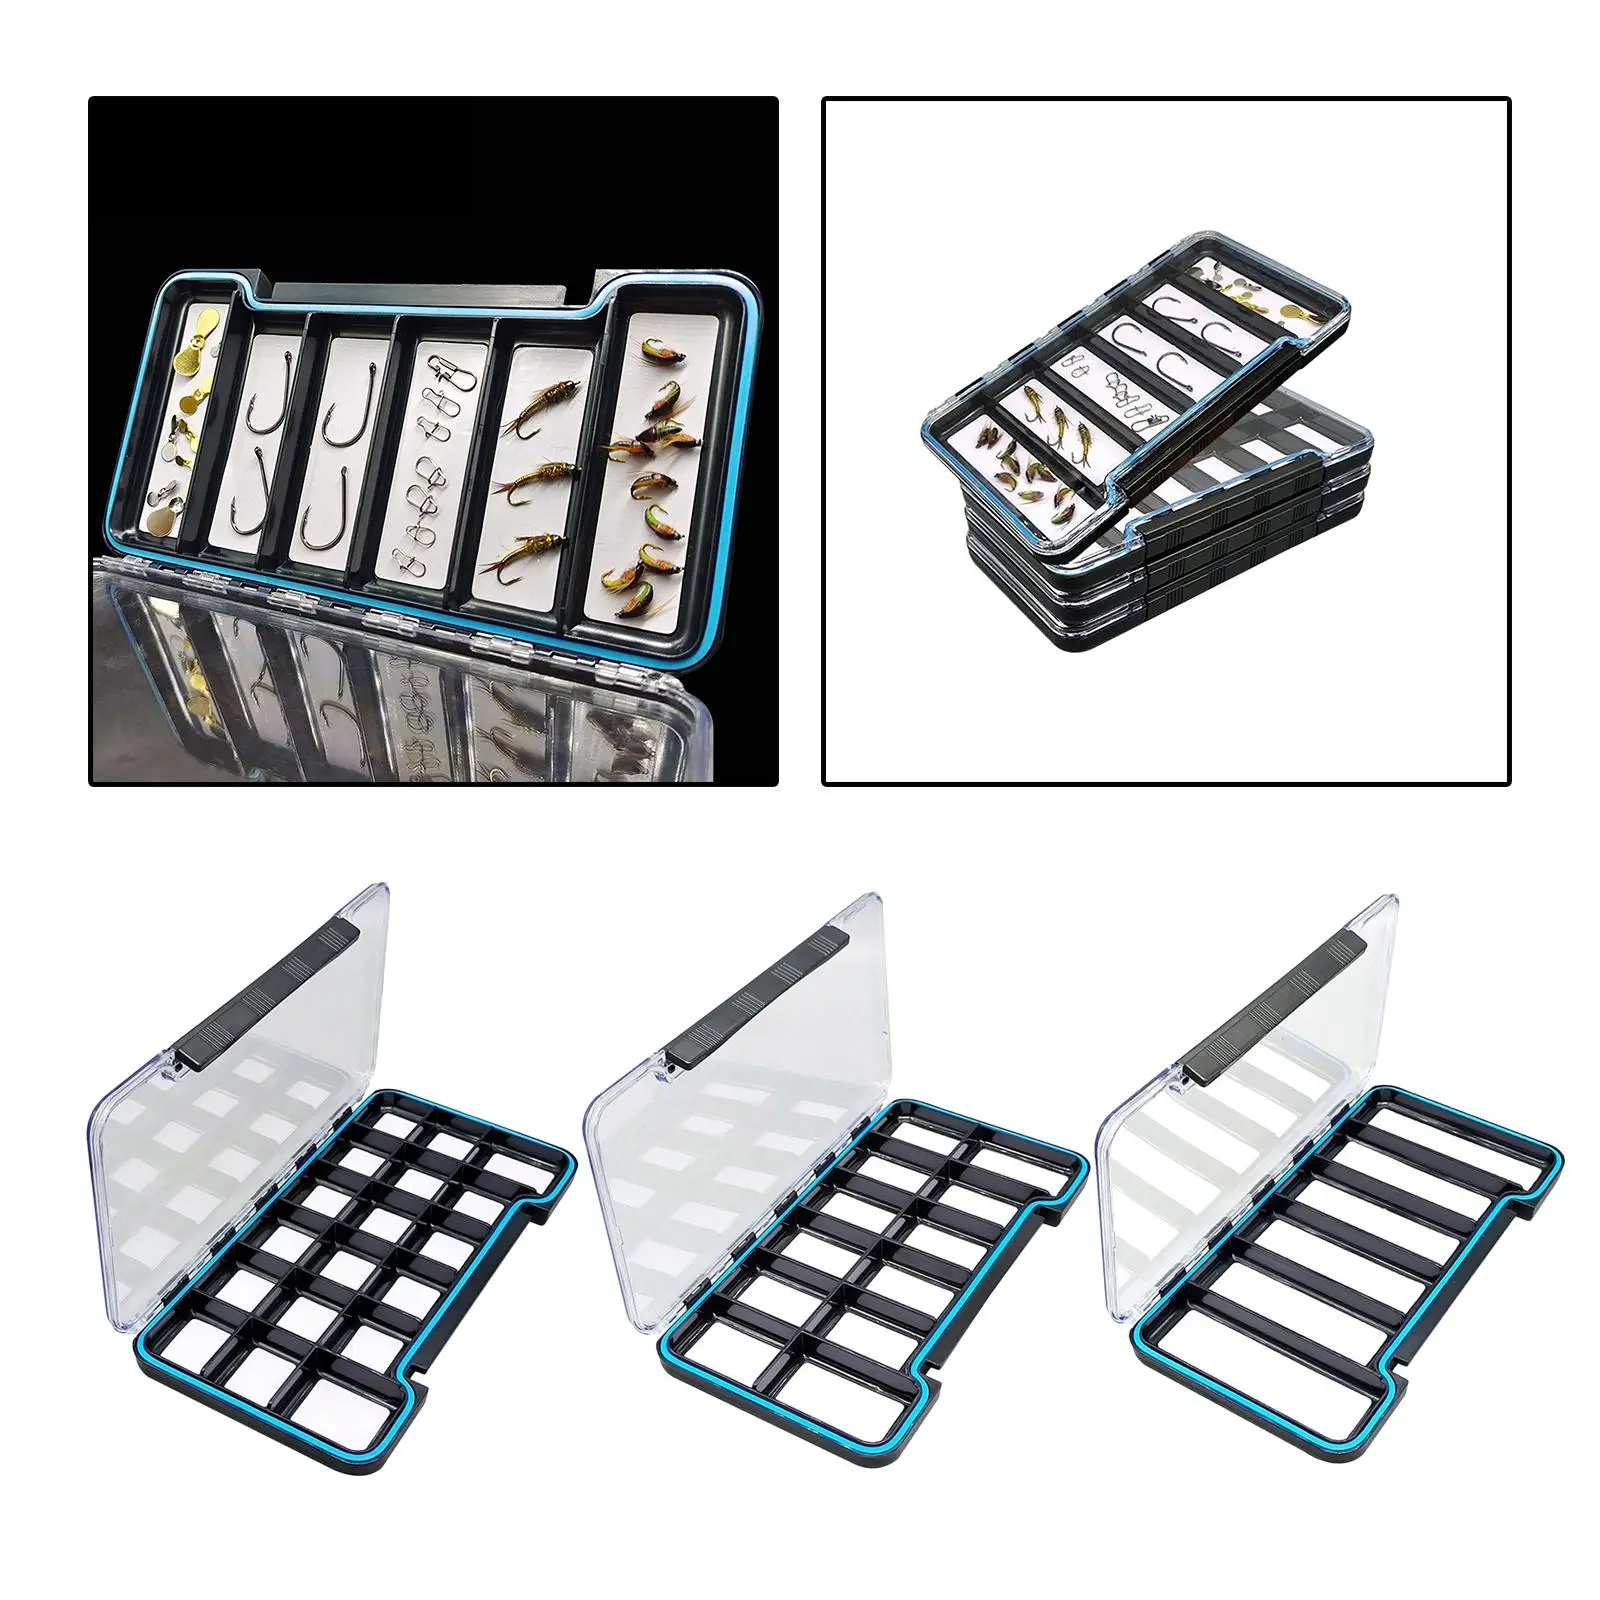 Waterproof Fly Box Magnetic Dry Flies Case Jigs Boxes Fly Tying Fishing Hooks Freshwater Saltwater Container Equipment Easy Grip